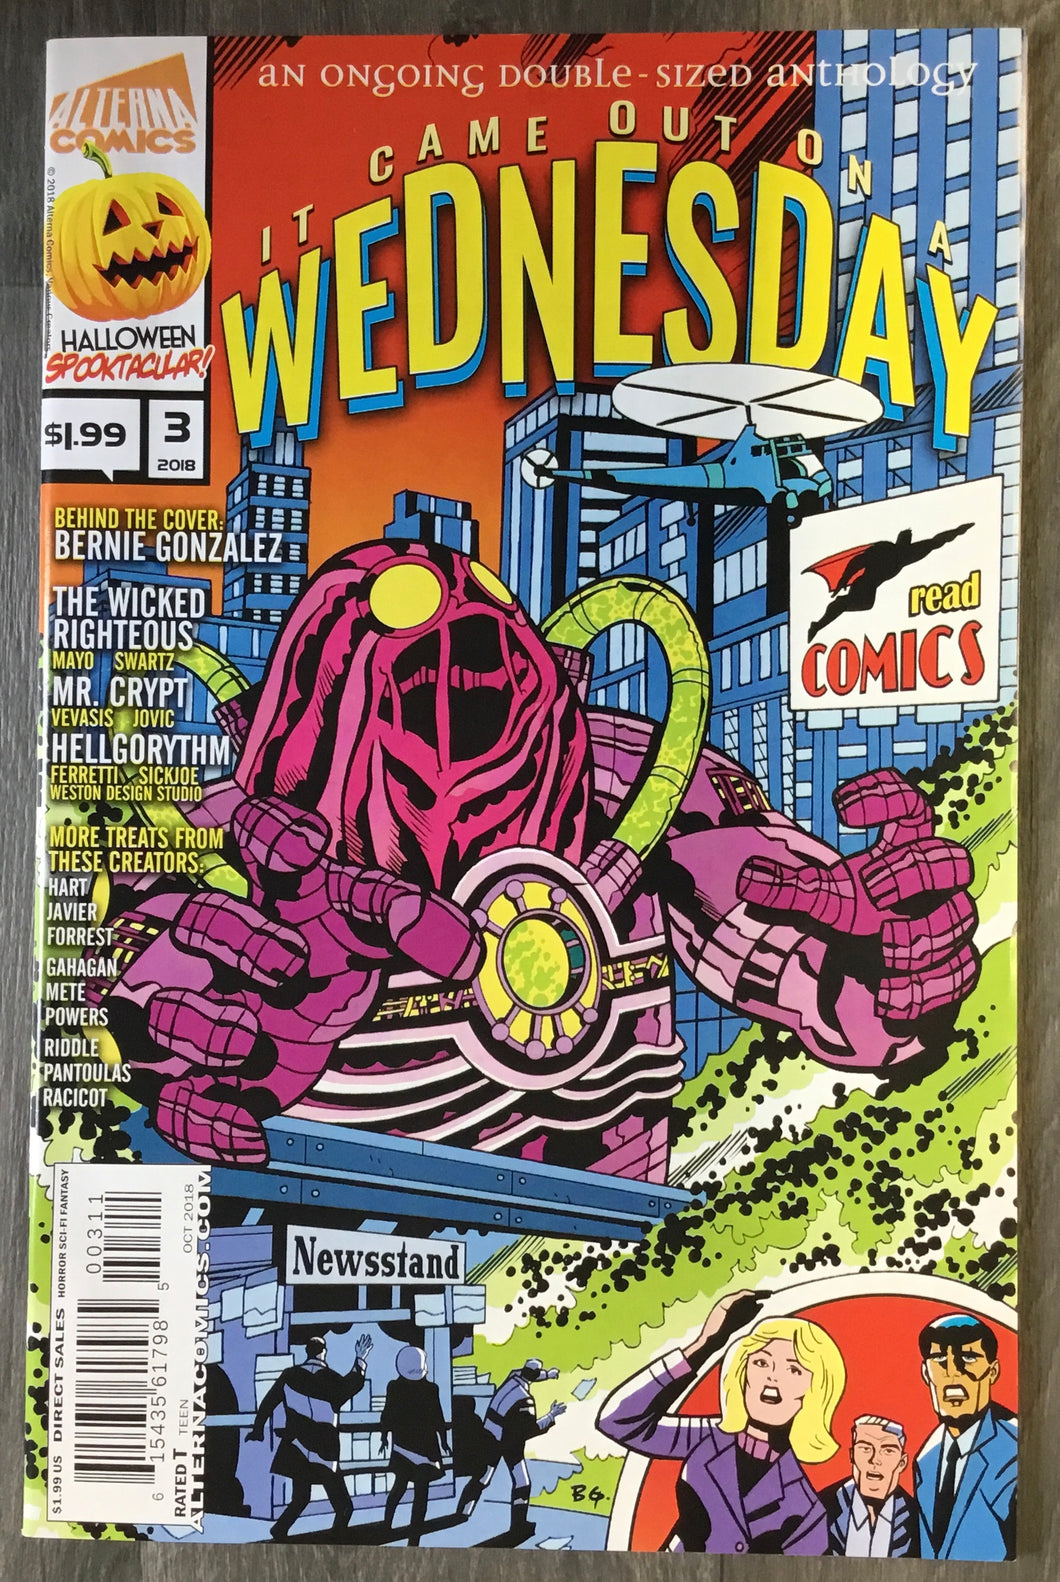 It Came Out on a Wednesday No. #3 2018 Alterna Comics